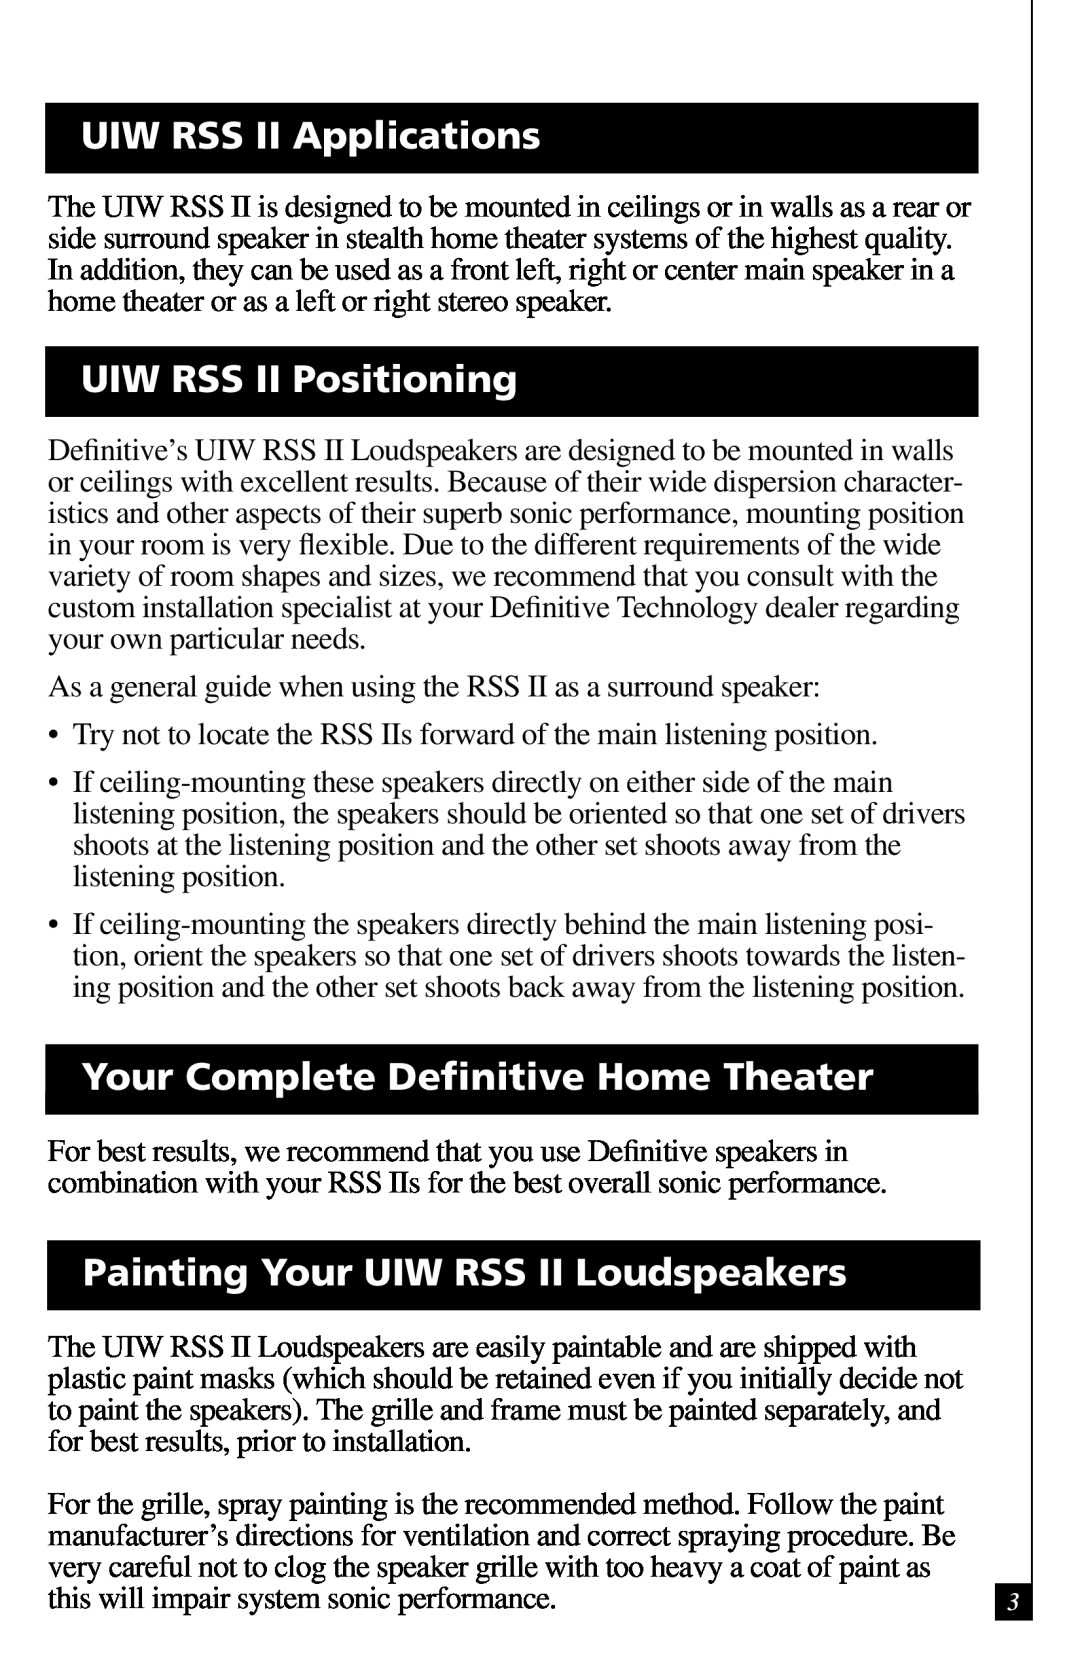 Definitive Technology owner manual UIW RSS II Applications, UIW RSS II Positioning, Your Complete Deﬁnitive Home Theater 